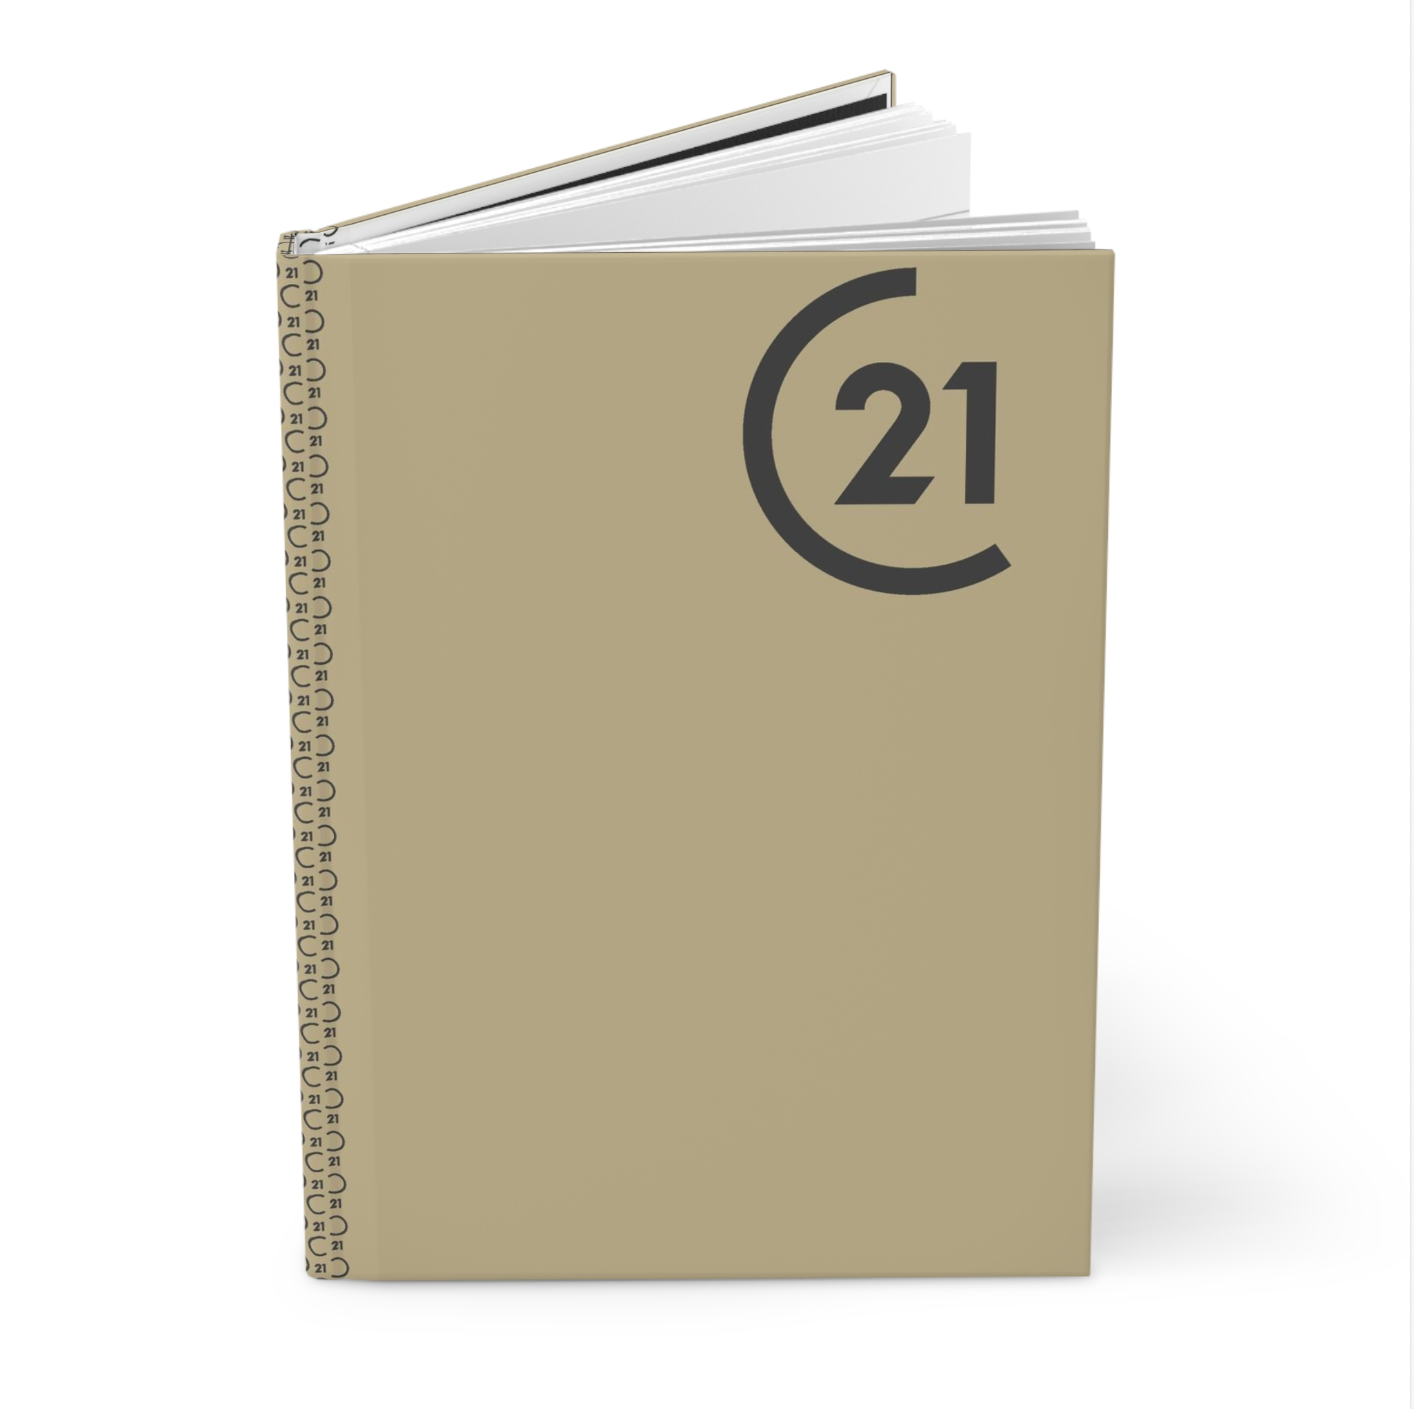 Century 21 Full Color Hardcover Binders Hazelnut Monogram (from as low as $10.46 per cover)